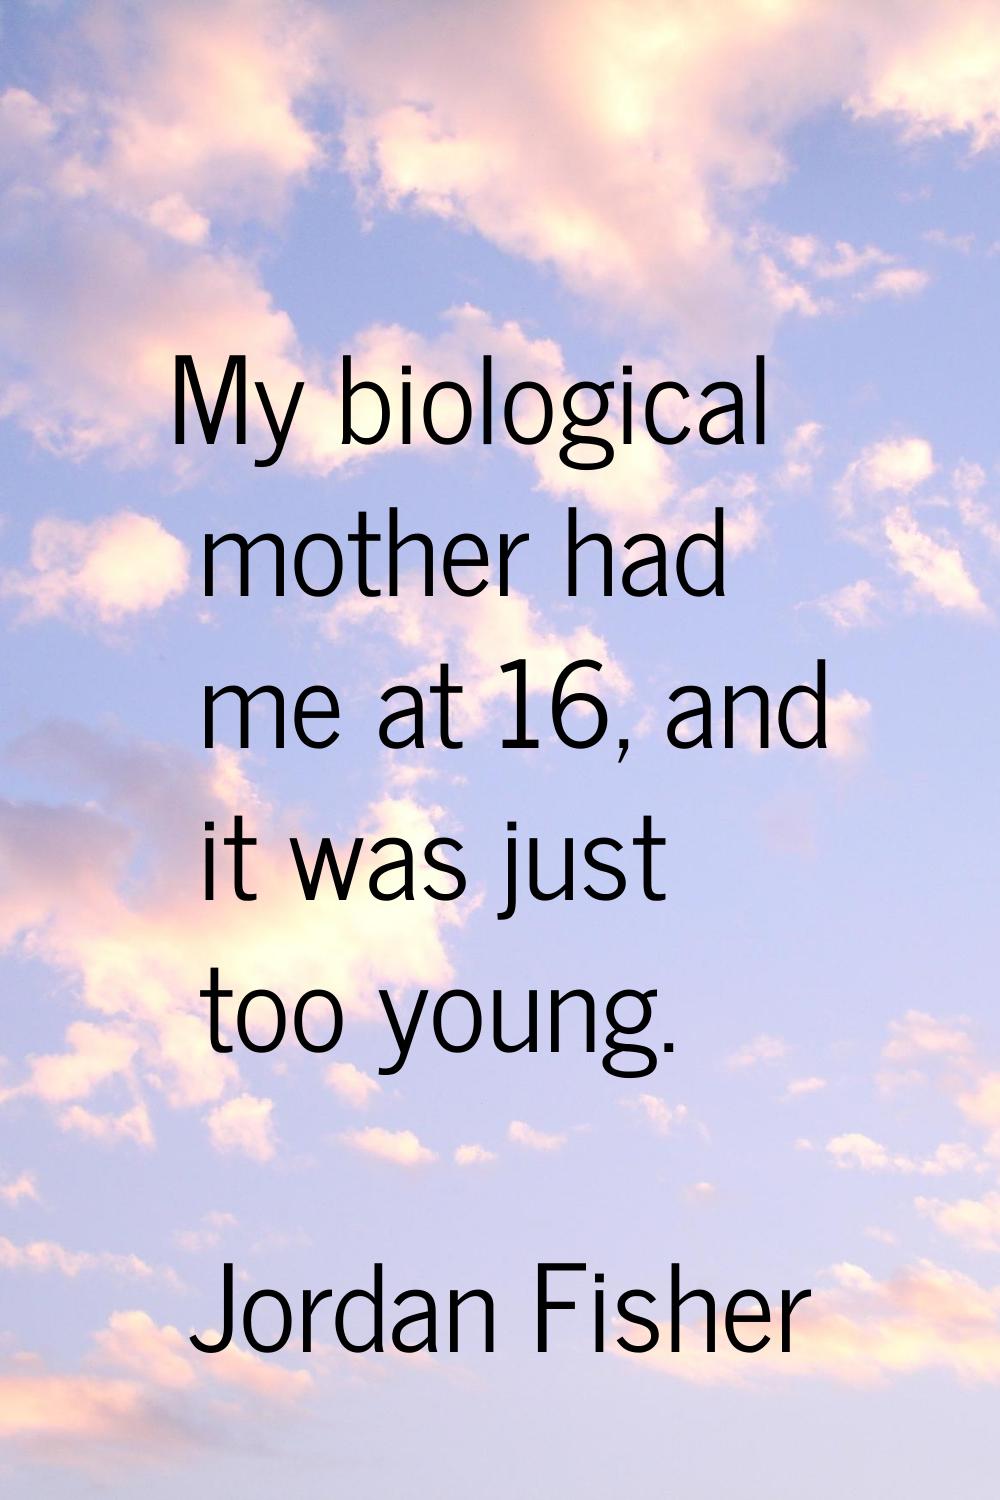 My biological mother had me at 16, and it was just too young.